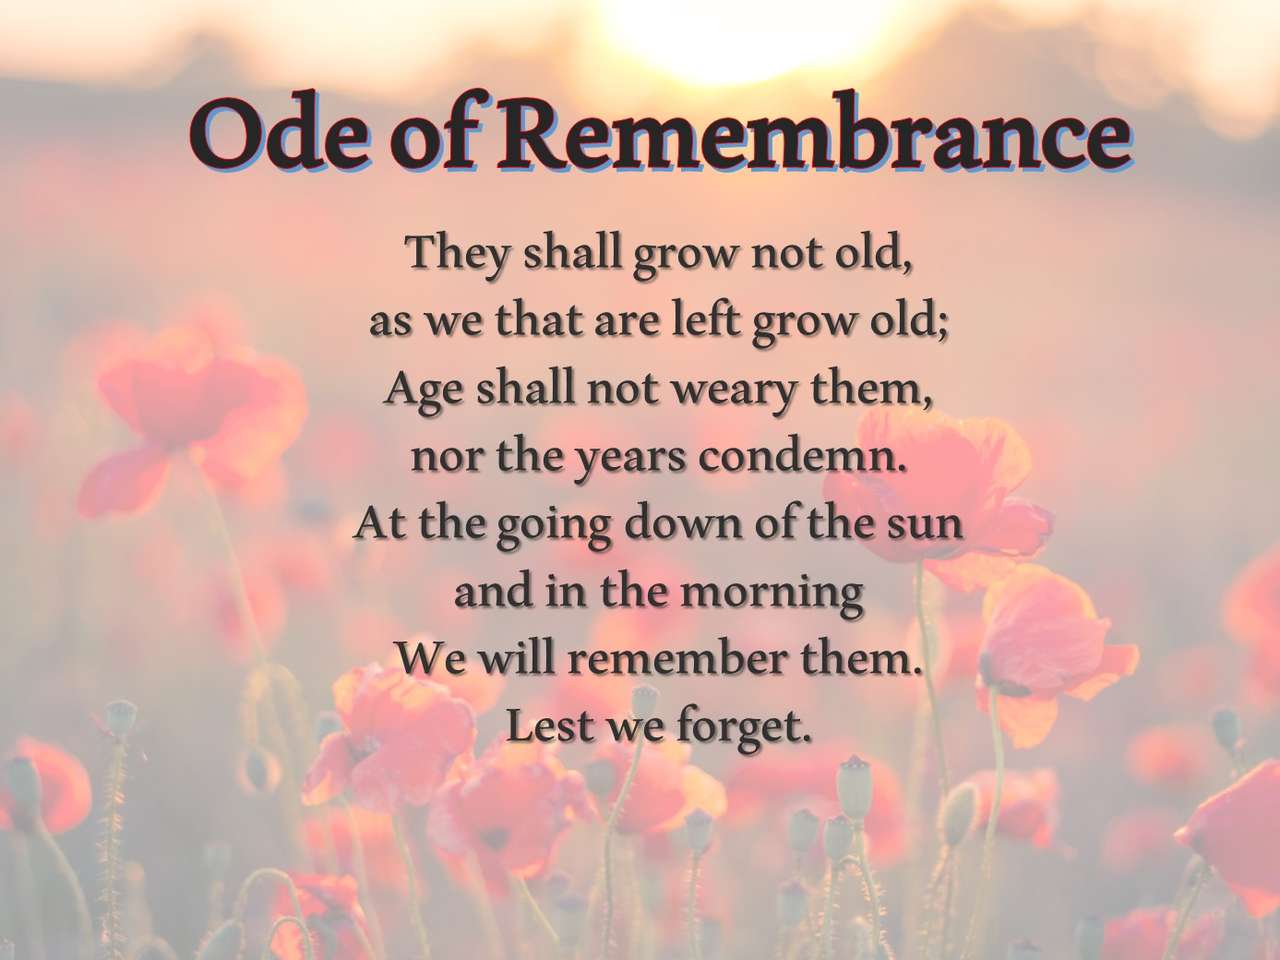 Ode of Remembrance online puzzle